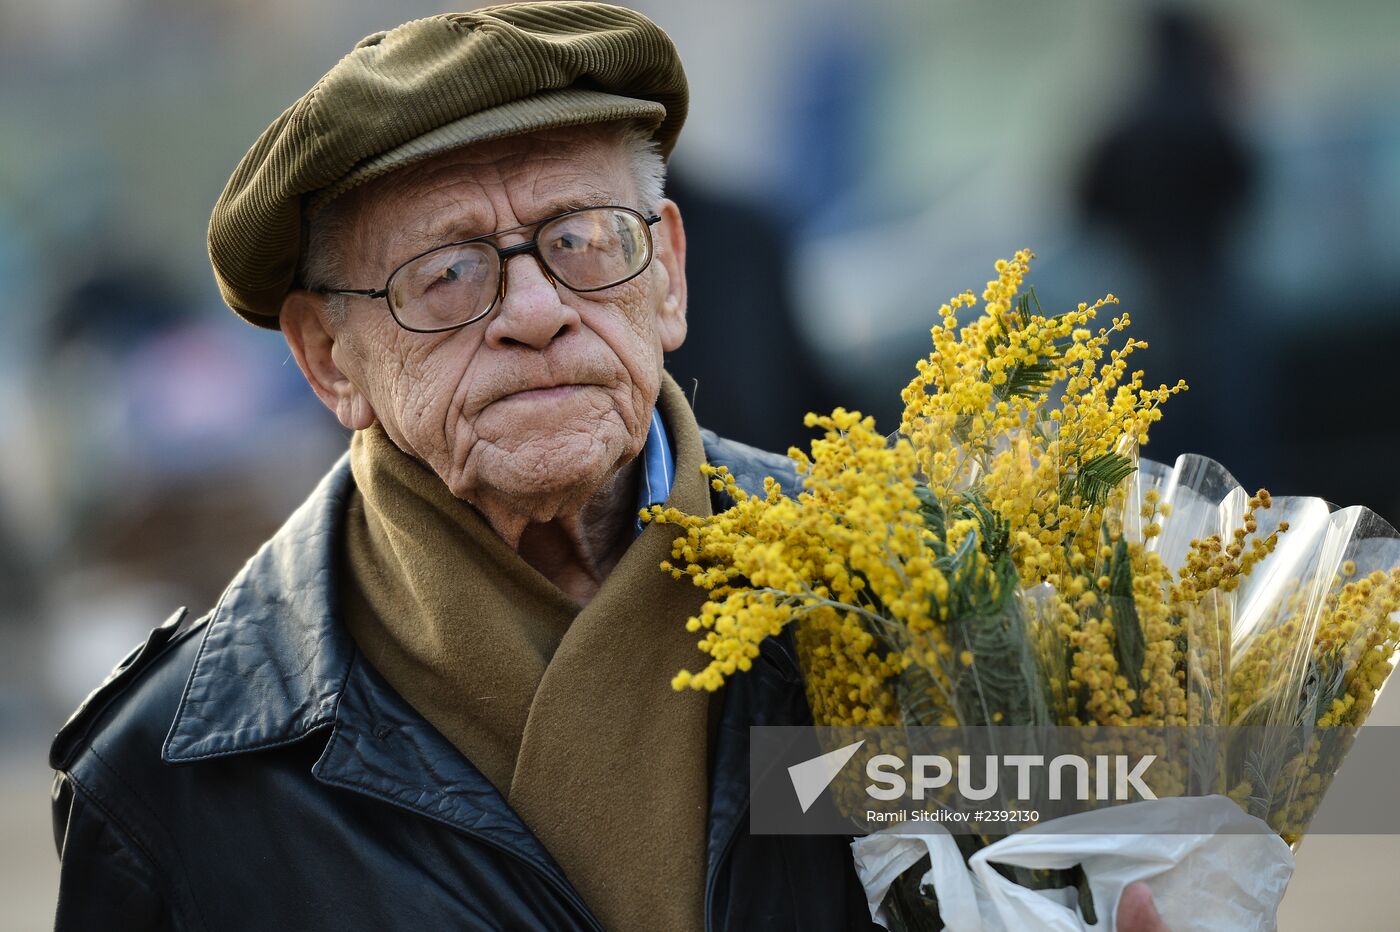 Selling flowers prior to International Women's Day